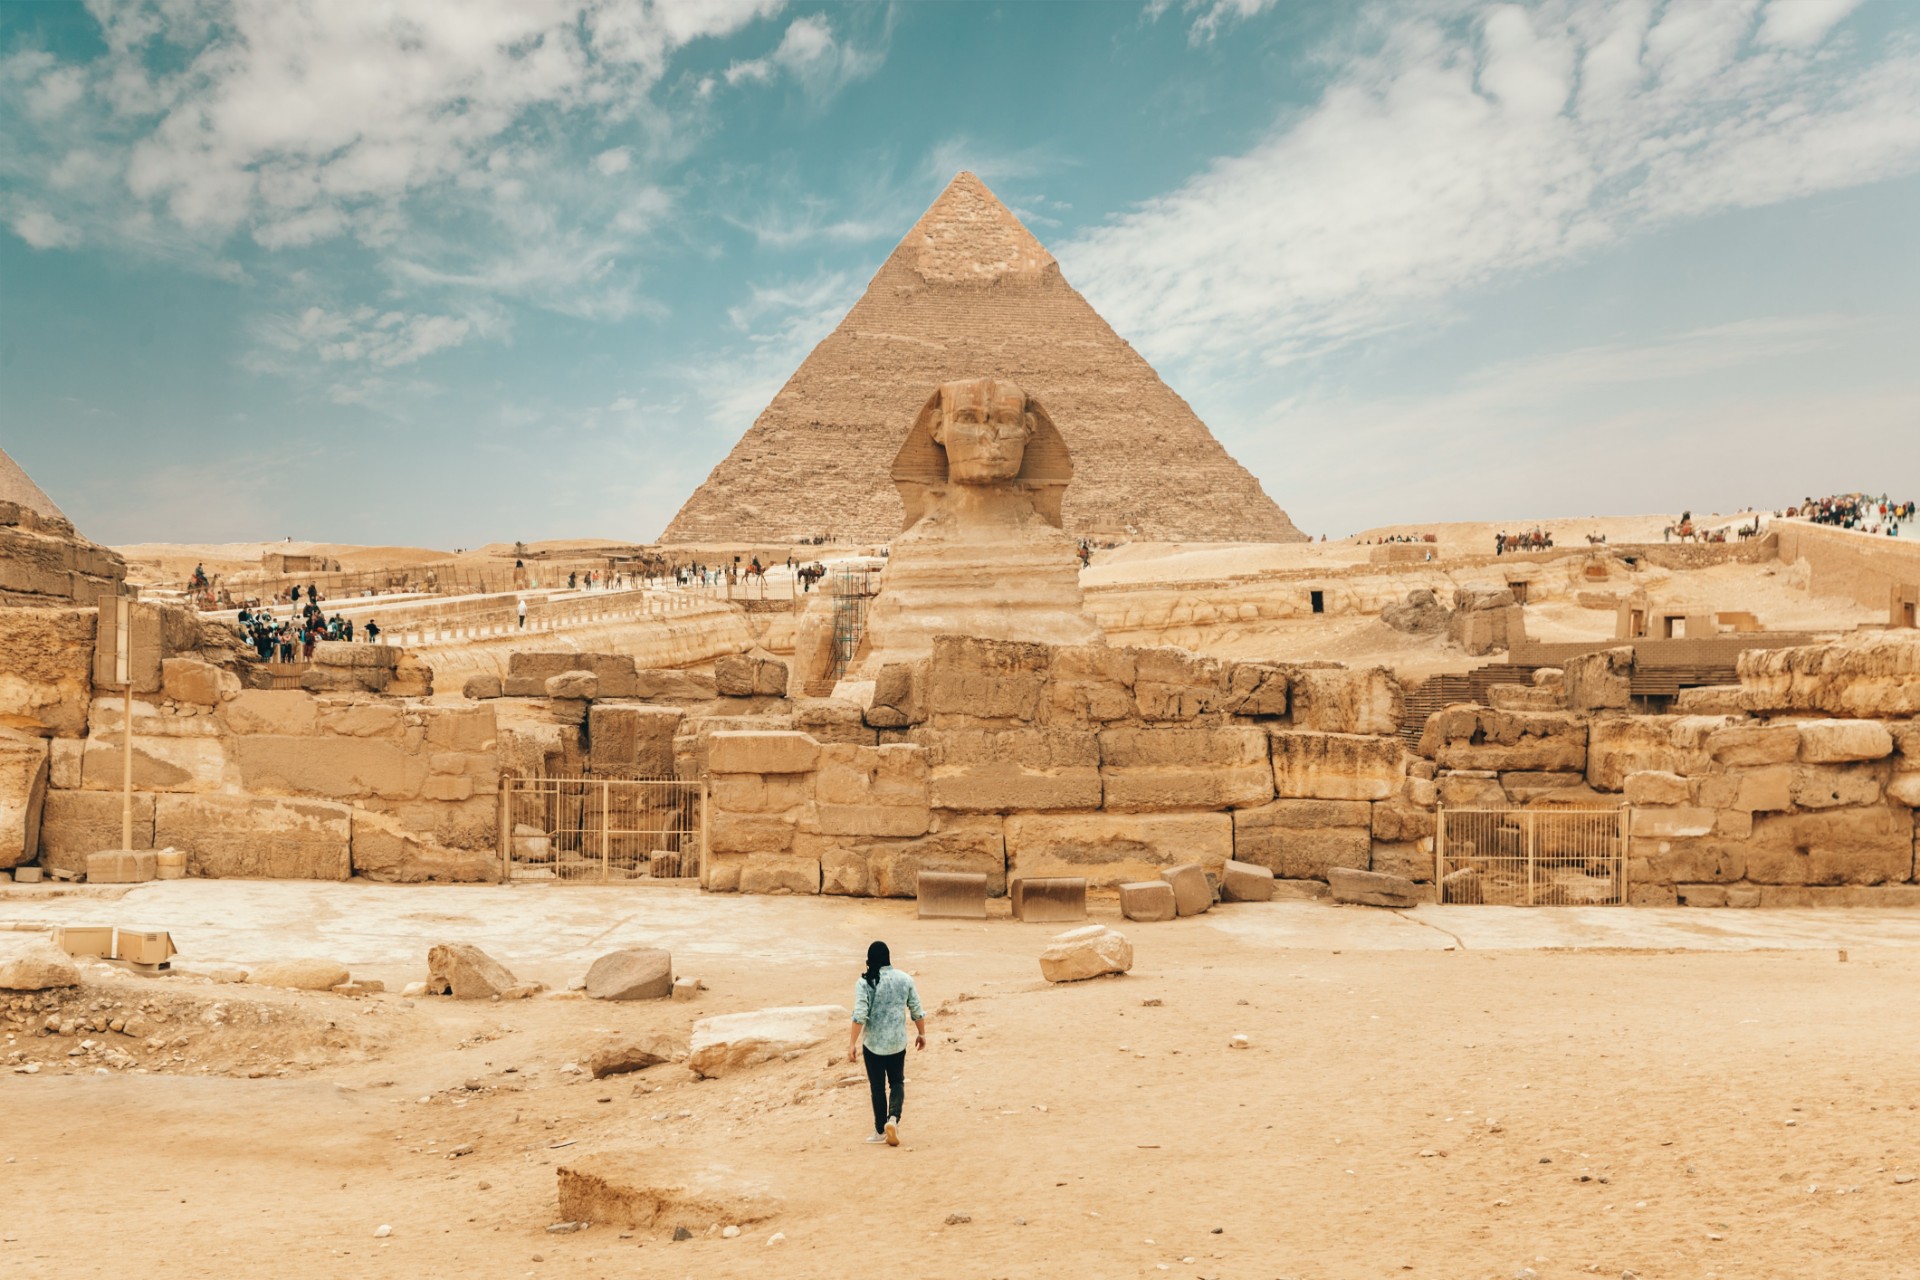 Is it safe to travel to Egypt? — COVID19 protocols in the country